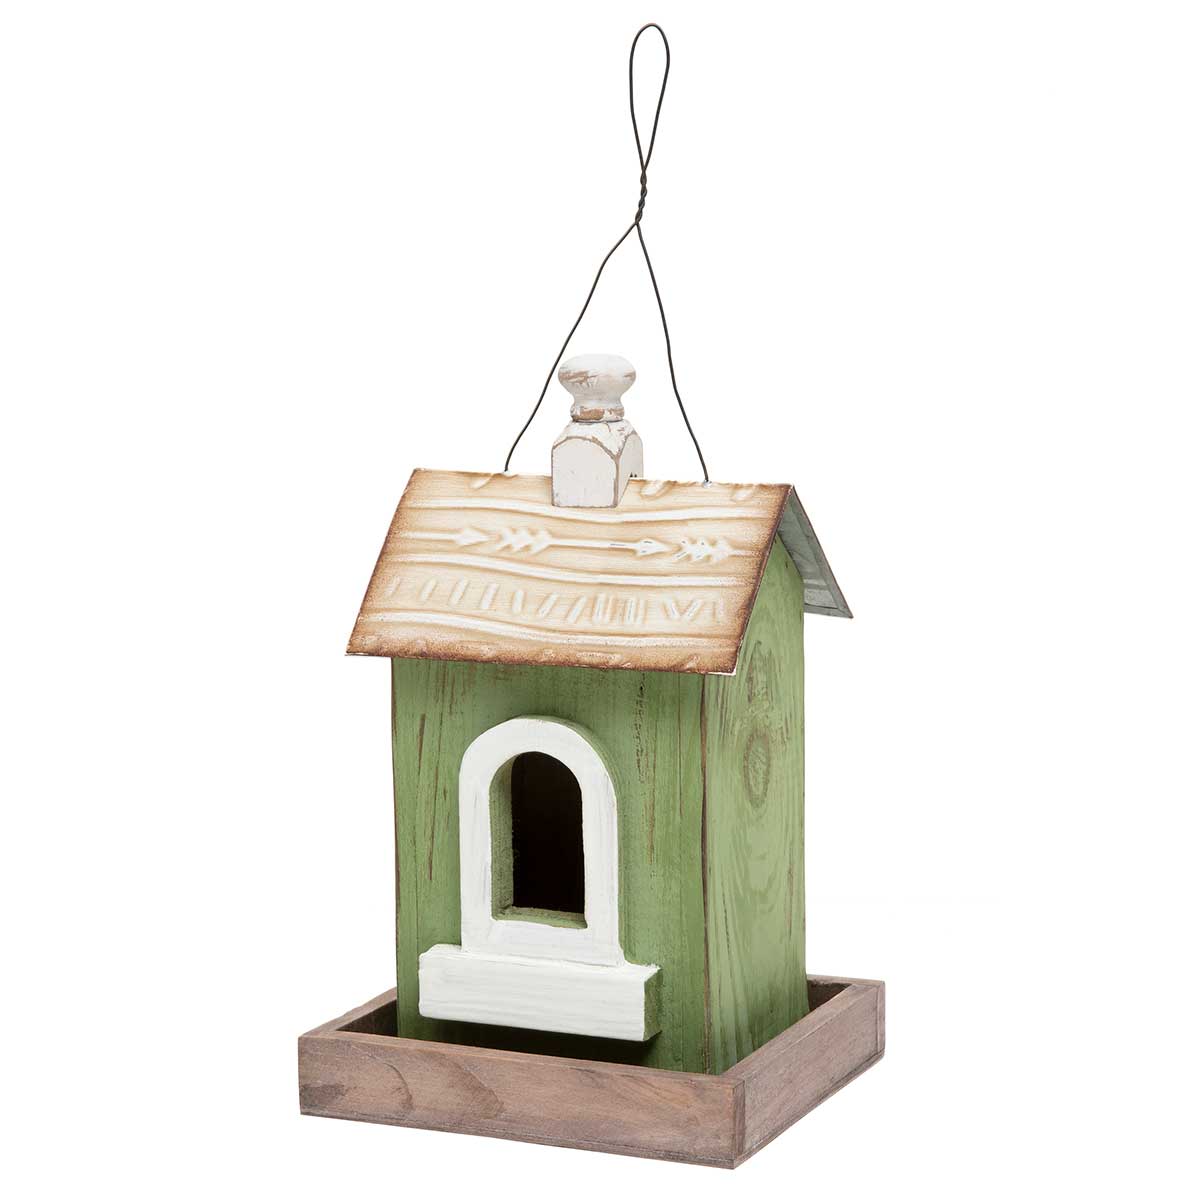 BIRDHOUSE MEADOW GREEN 5.5IN X 4.75IN X 8.5IN METAL/WOOD - Click Image to Close